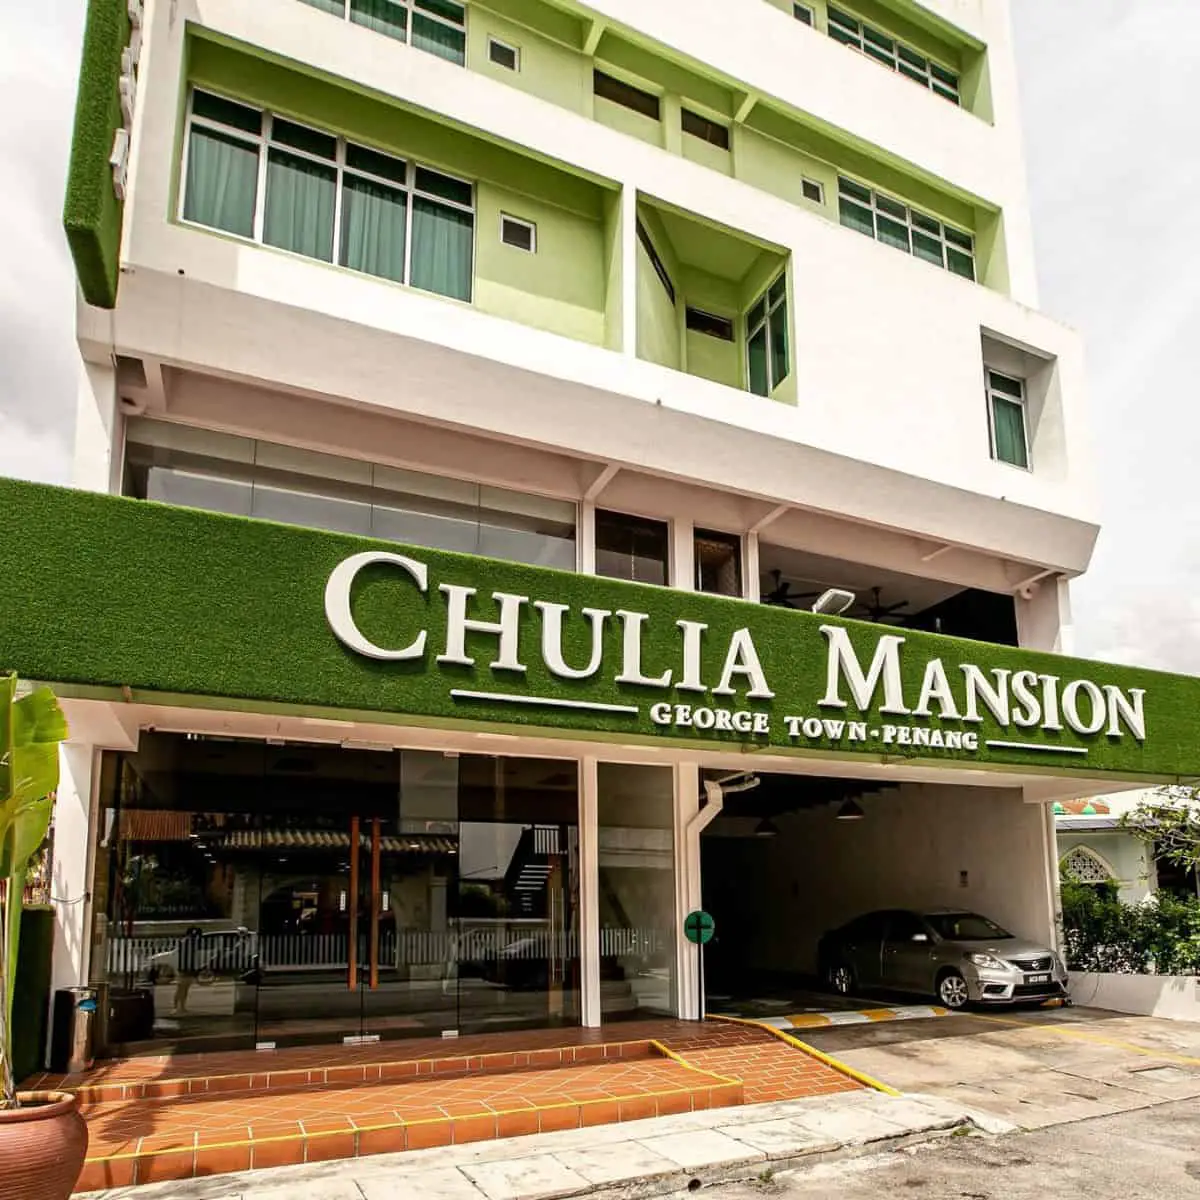 Chulia Mansion front view of the building with green paint